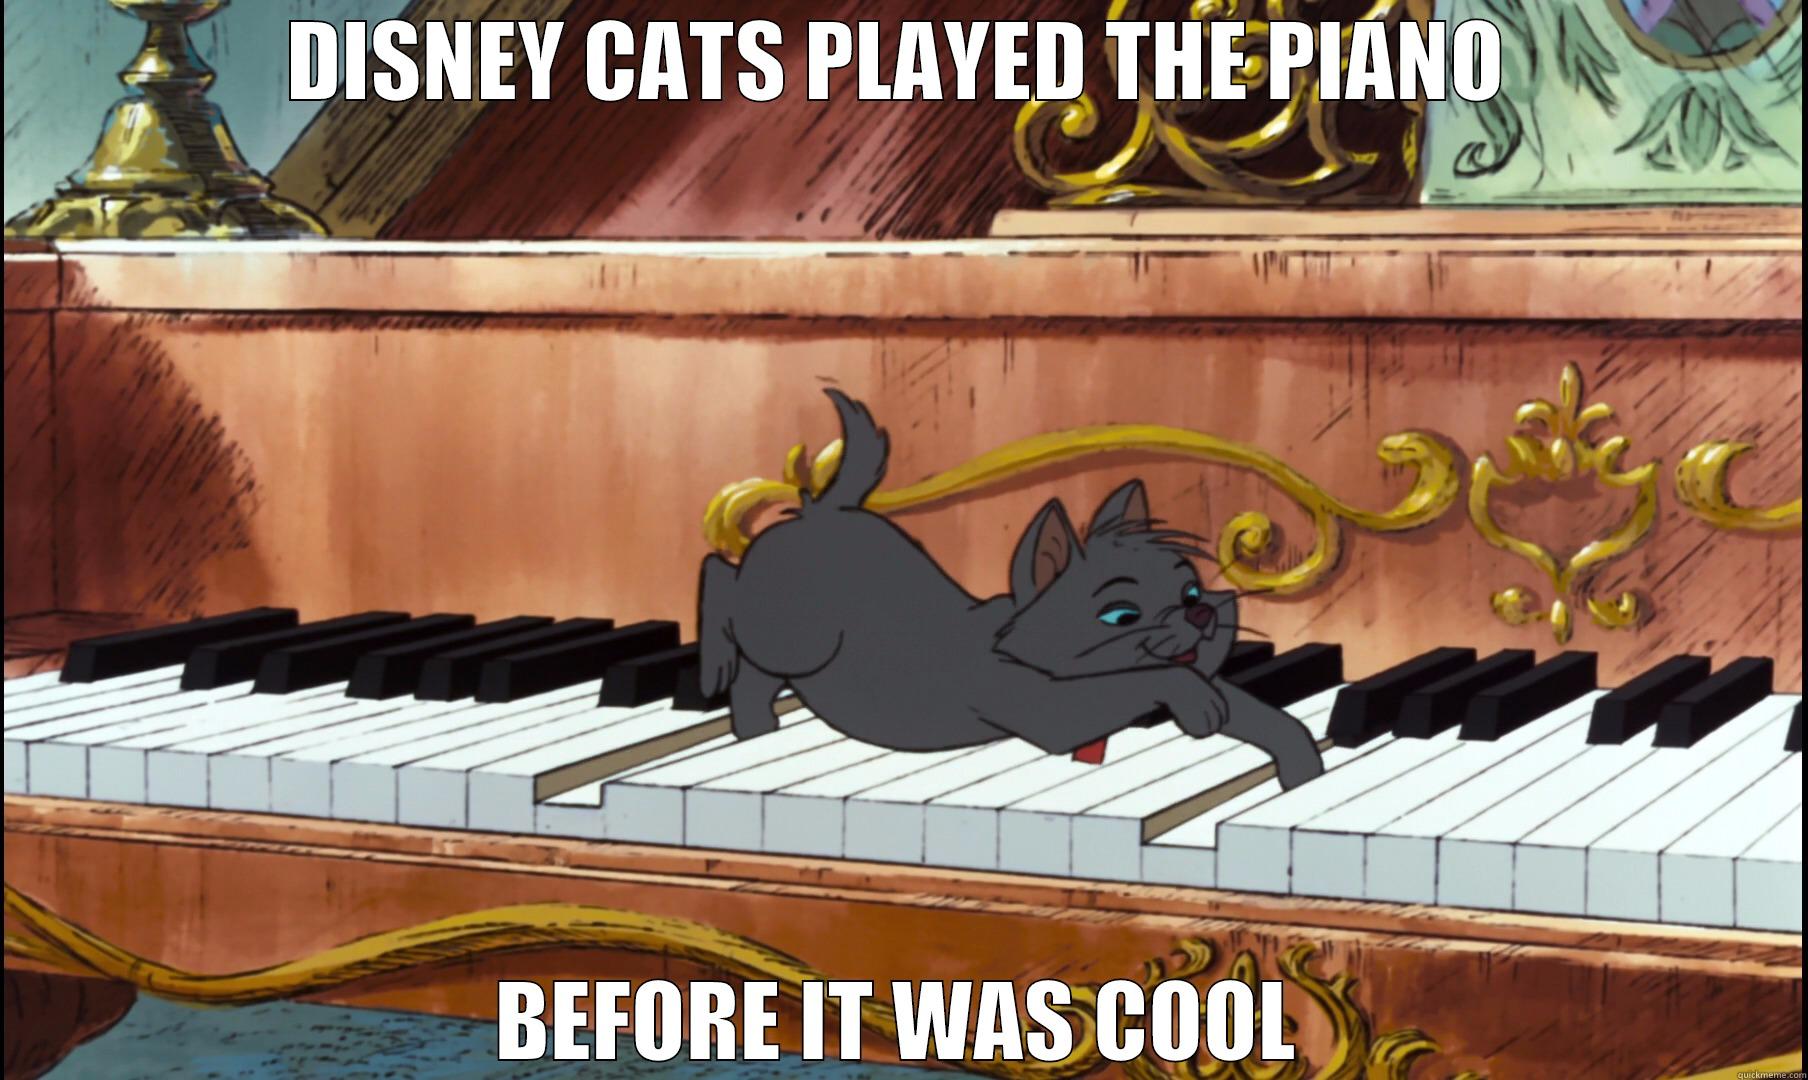 Disney Cats Playing Piano - DISNEY CATS PLAYED THE PIANO BEFORE IT WAS COOL Misc